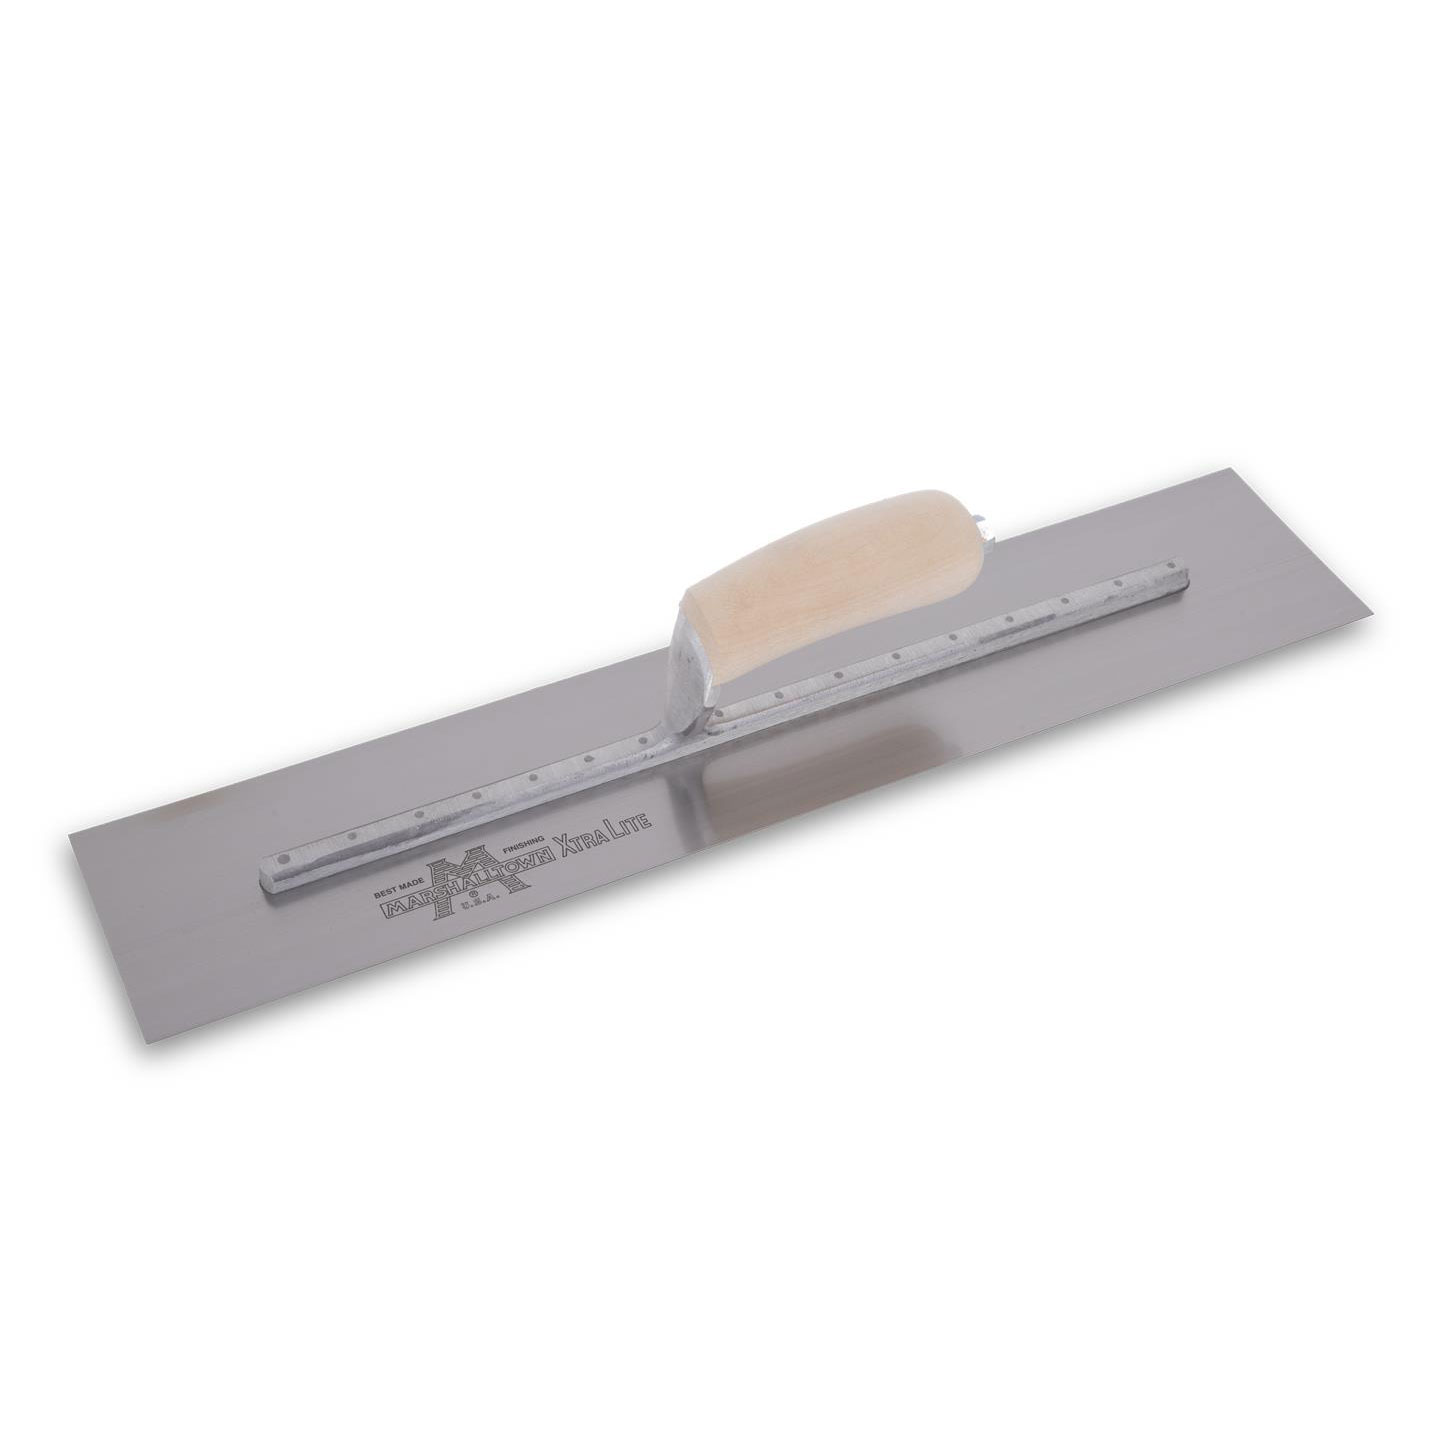 Marshalltown MXS815 18in. x 5in. Finishing Trowel Curved Wood Handle MAT-MXS815